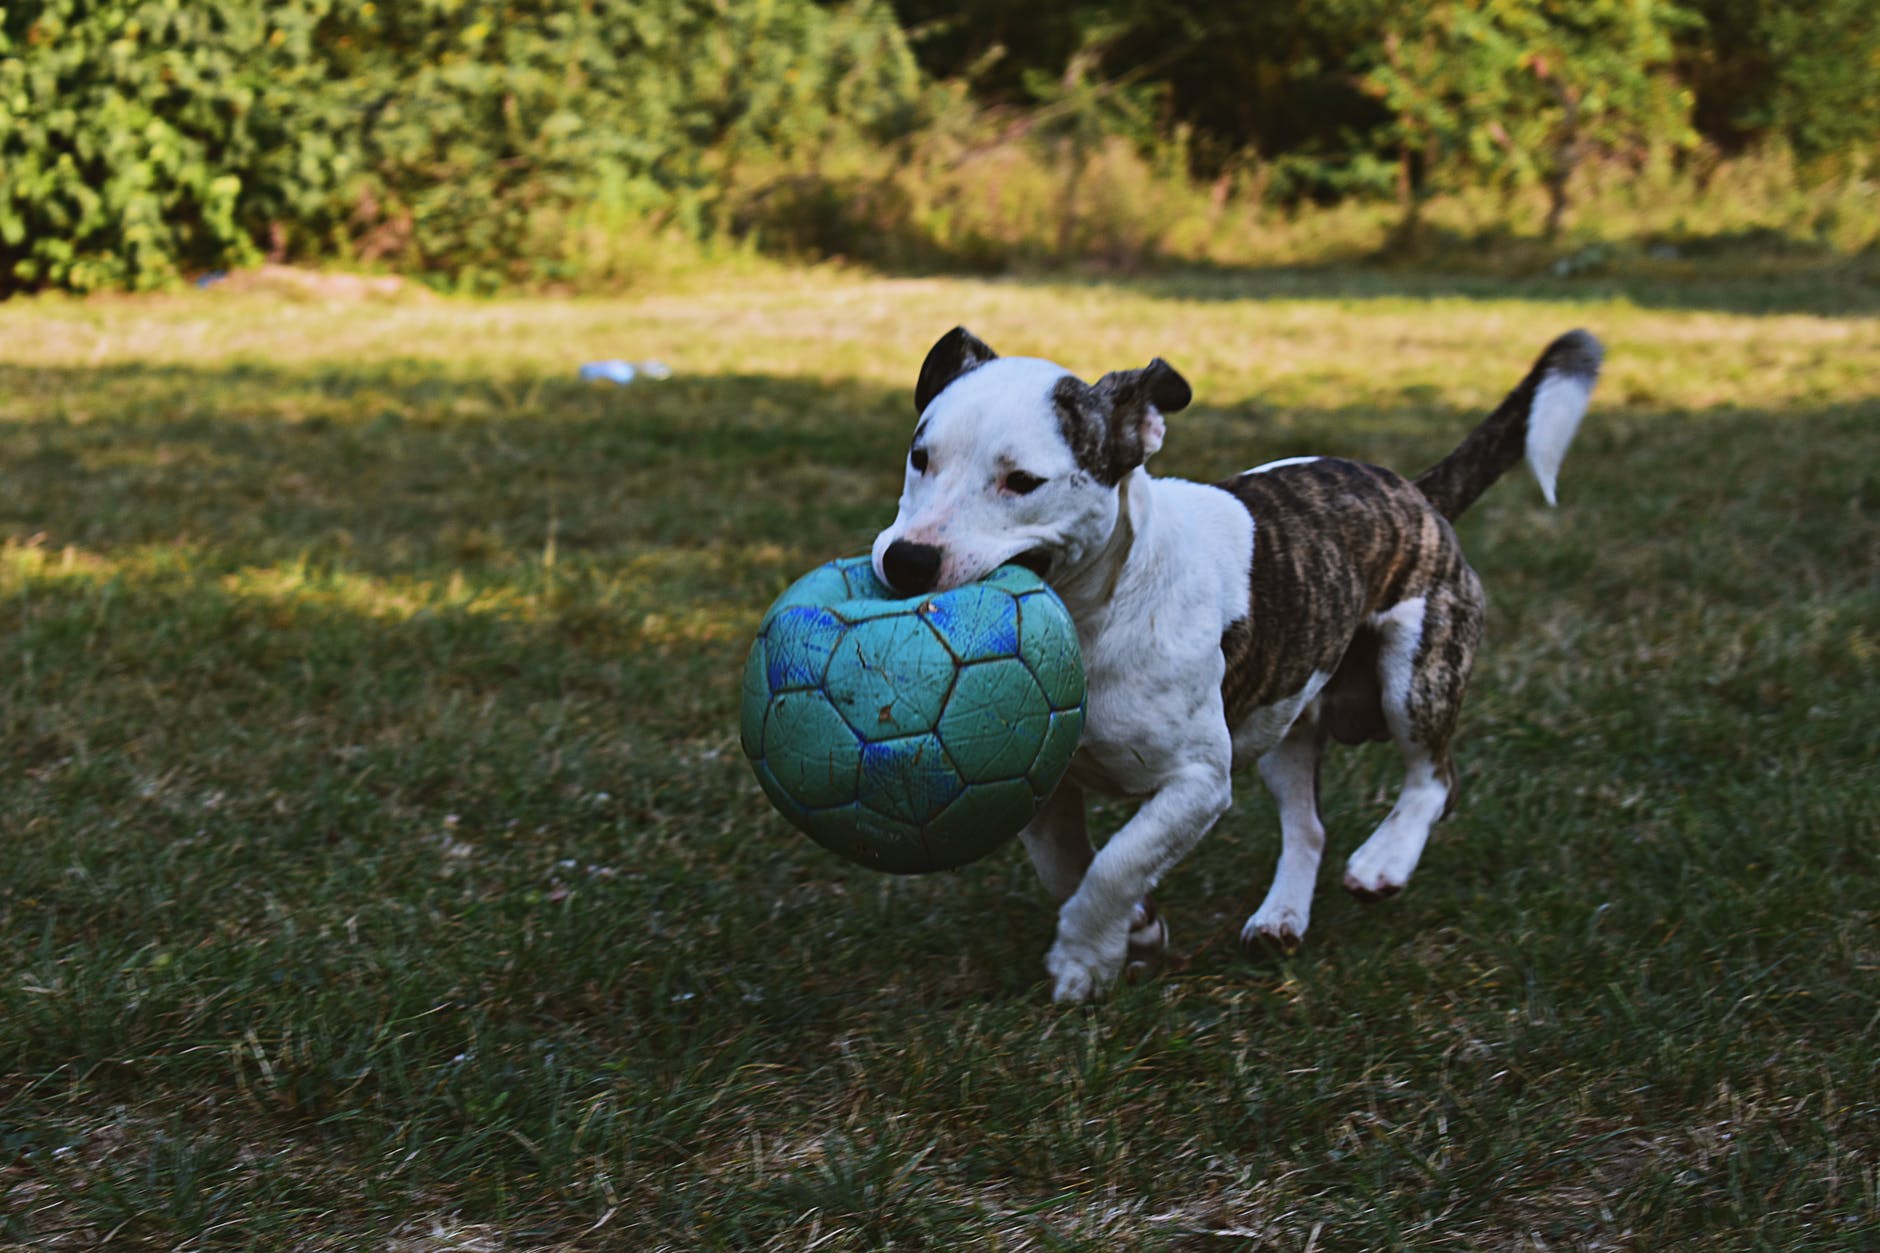 brindle and white american pit bull terrier puppy walking outdoor holding green ball